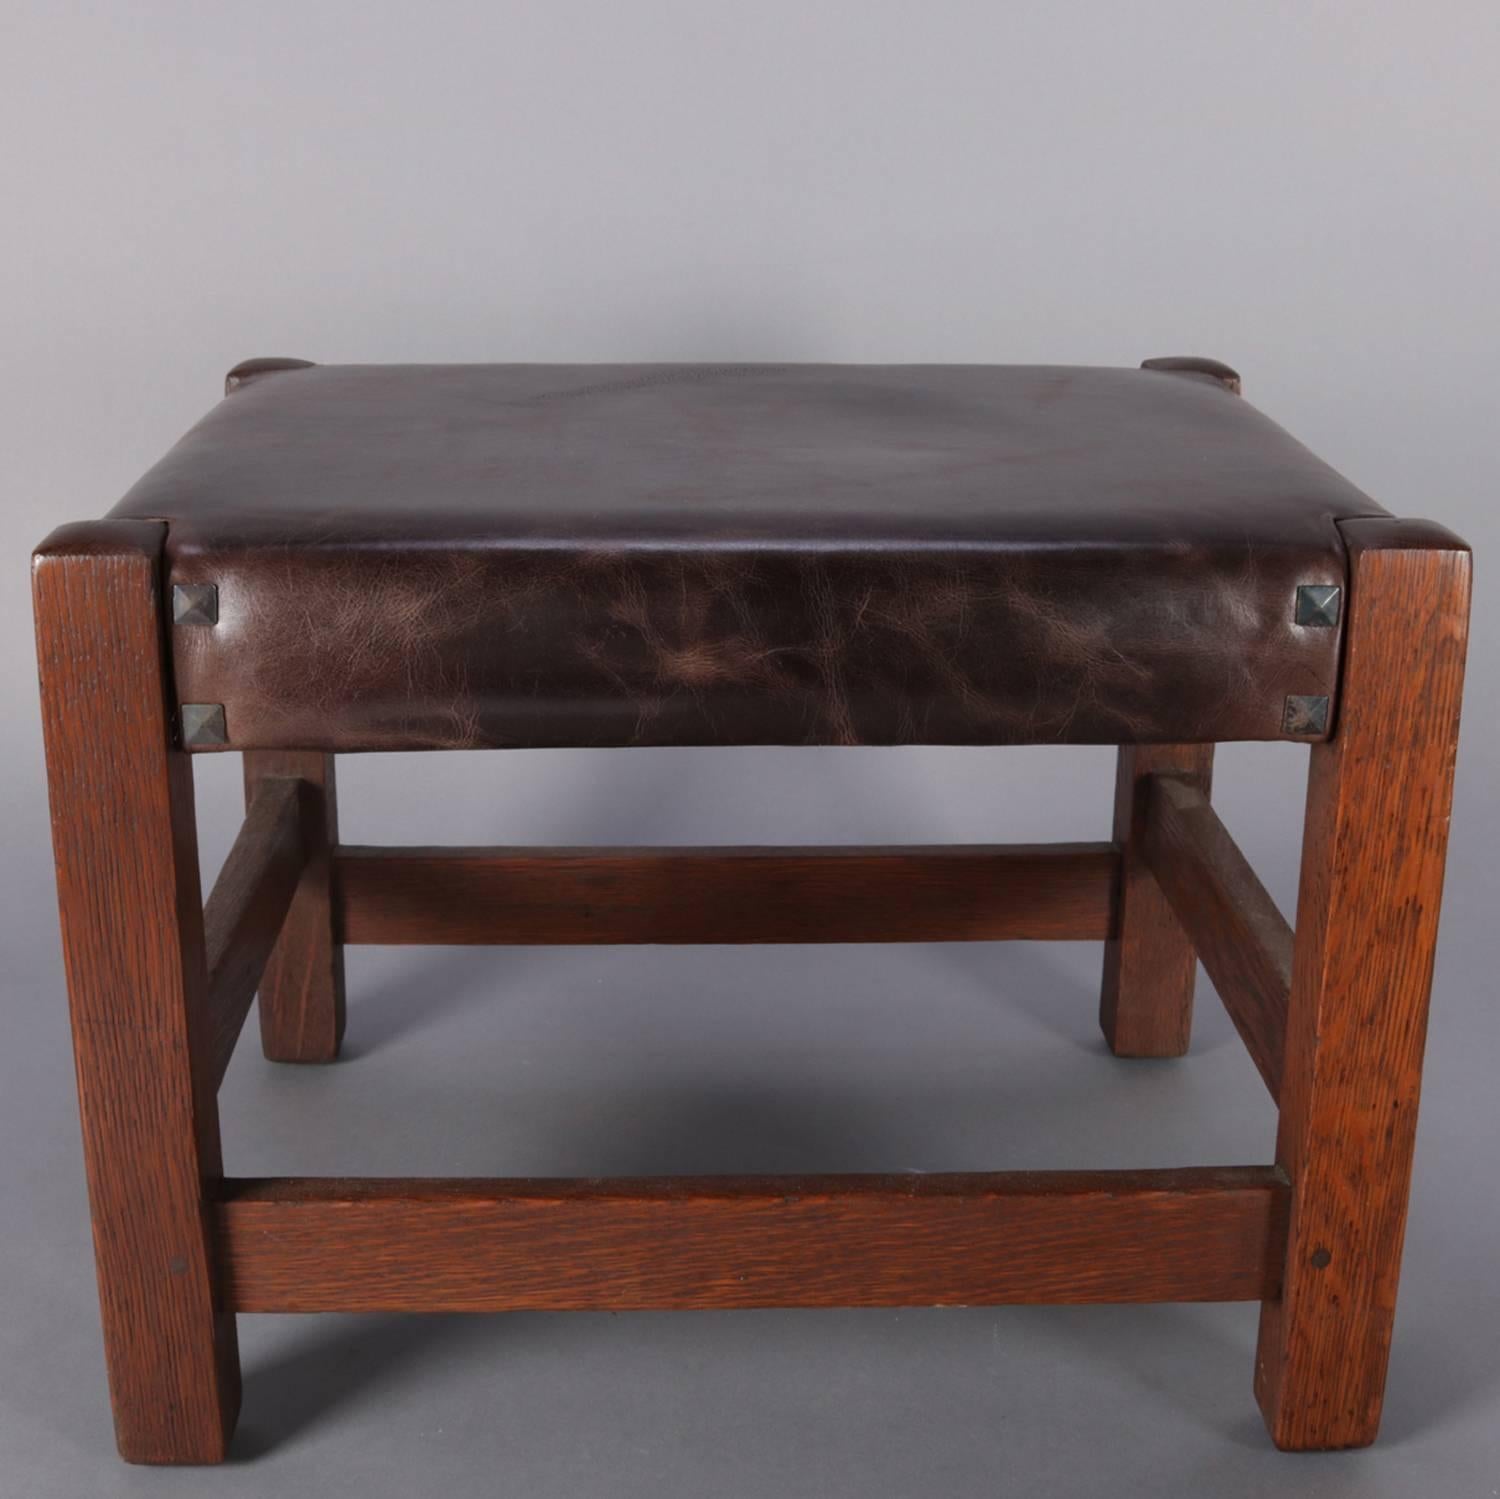 Arts and Crafts Mission oak footstool by Gustav Stickley features traditional simple form with pegged construction, faux leather upholstery and pyramid upholstery tacks, signed Gustav Stickley, circa 1910

Measures: 15